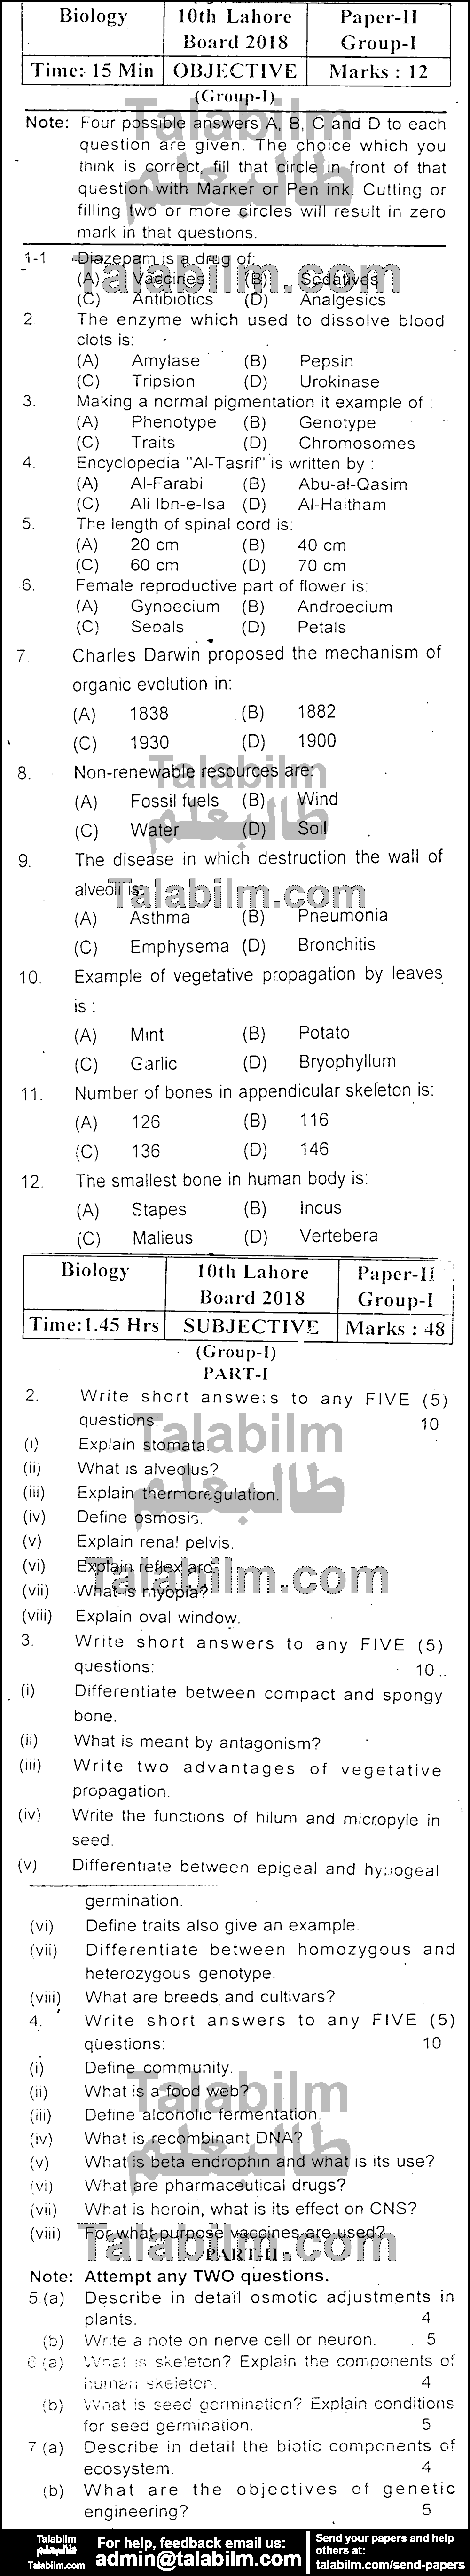 Biology 0 past paper for English Medium 2018 Group-I